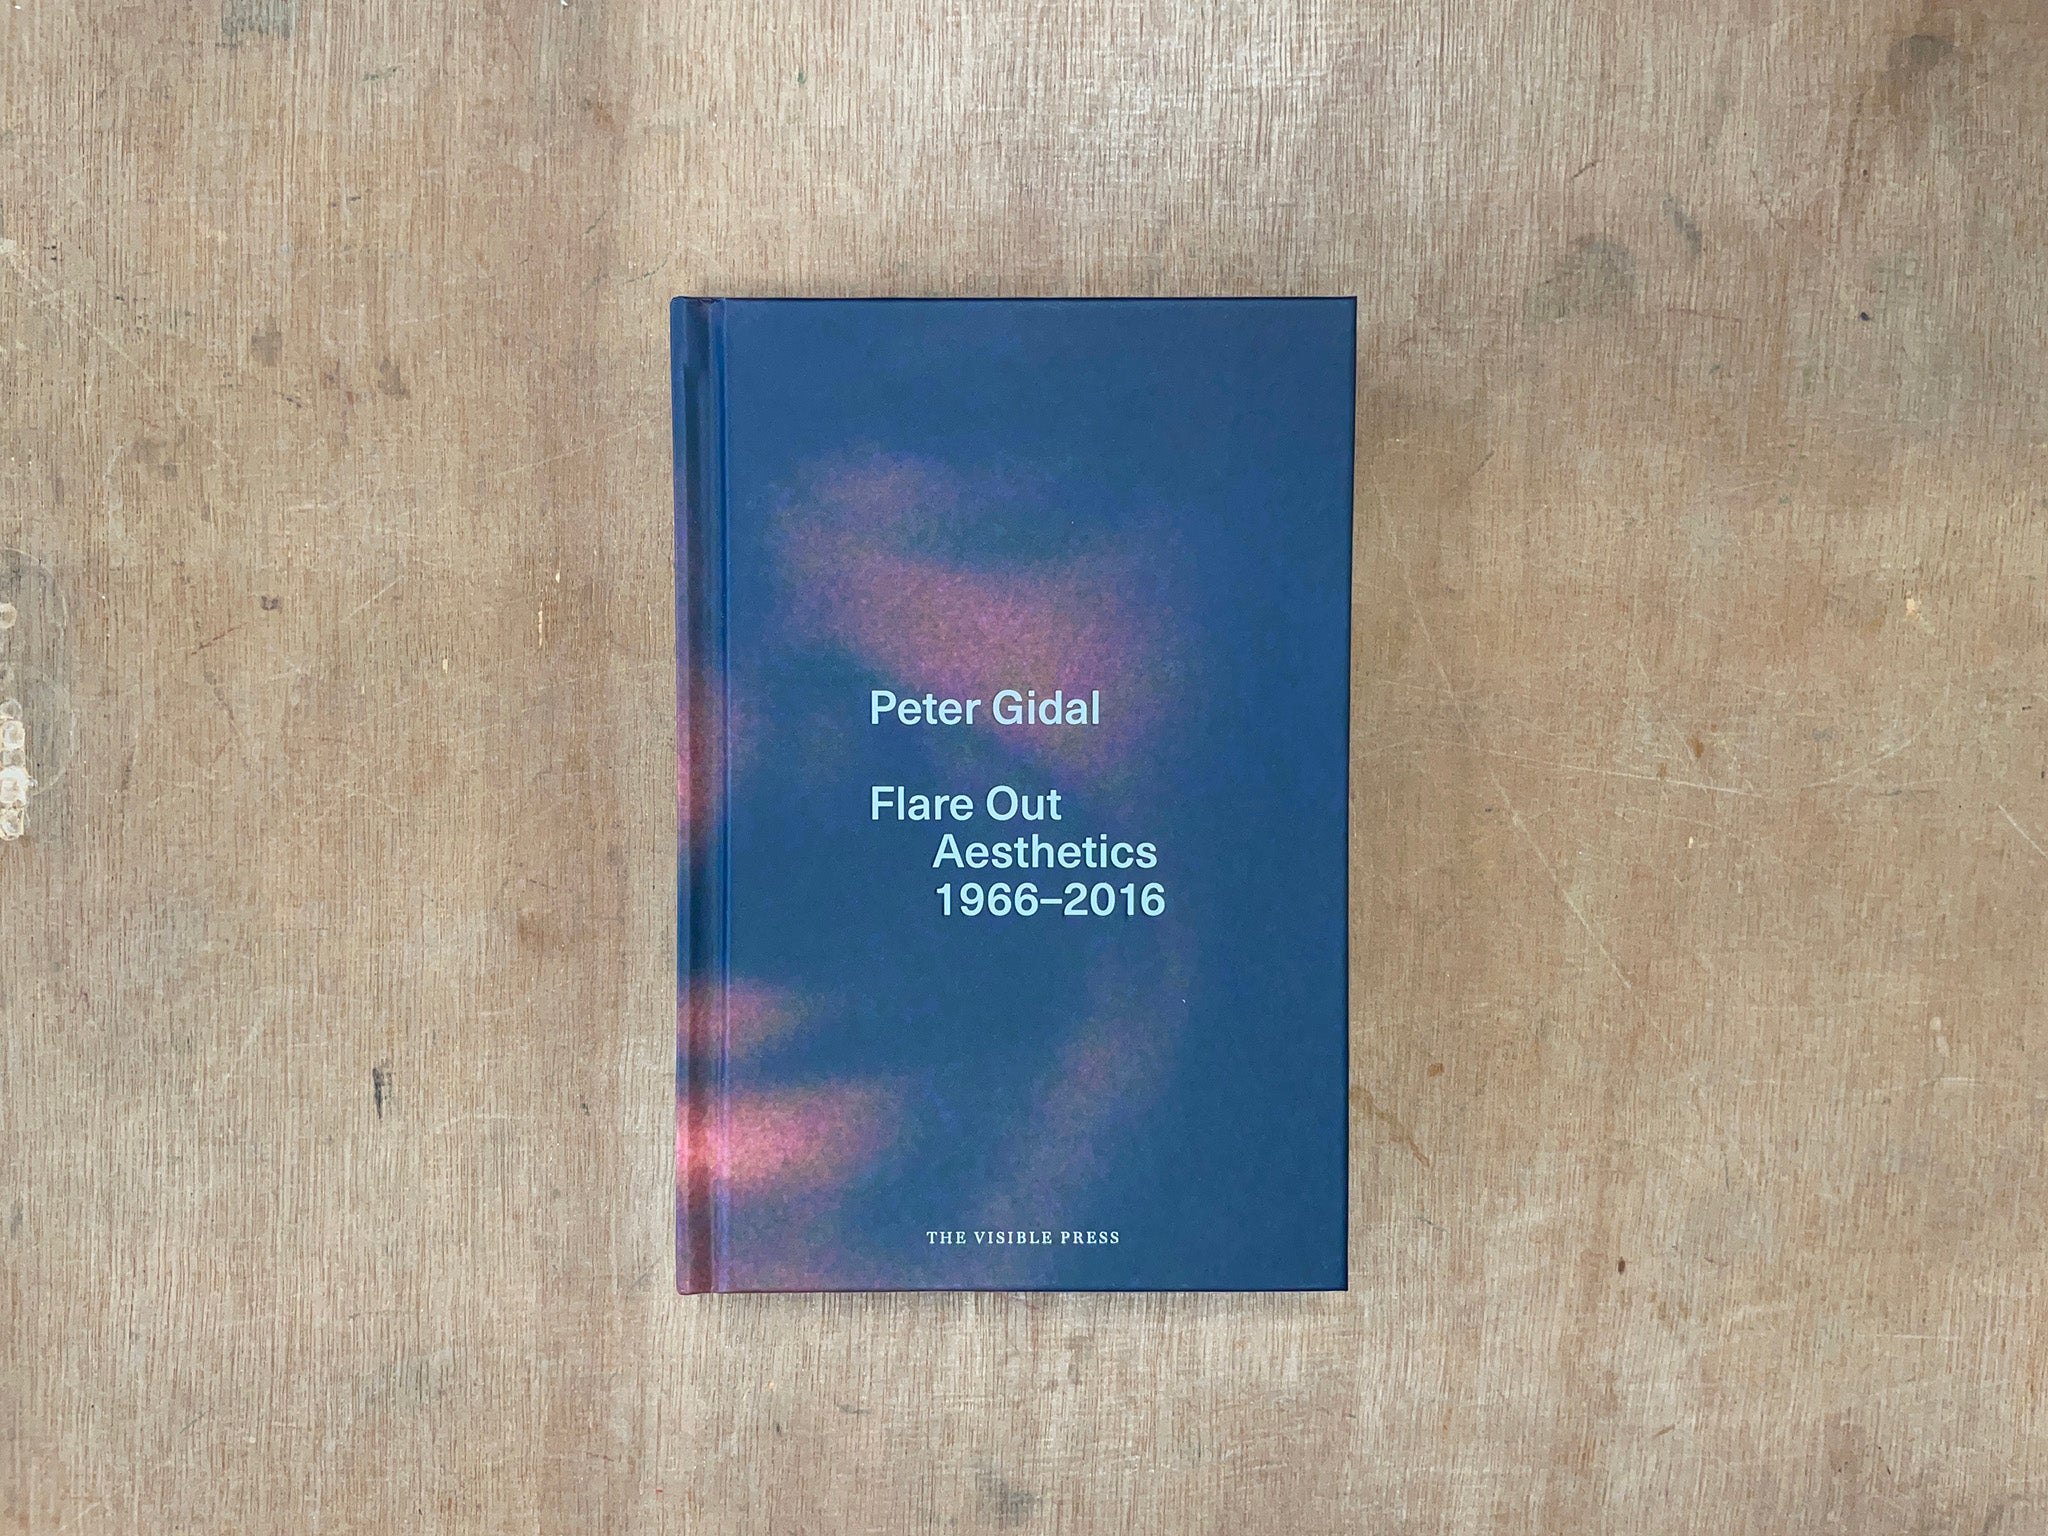 FLARE OUT: AESTHETICS 1966–2016 by Peter Gidal